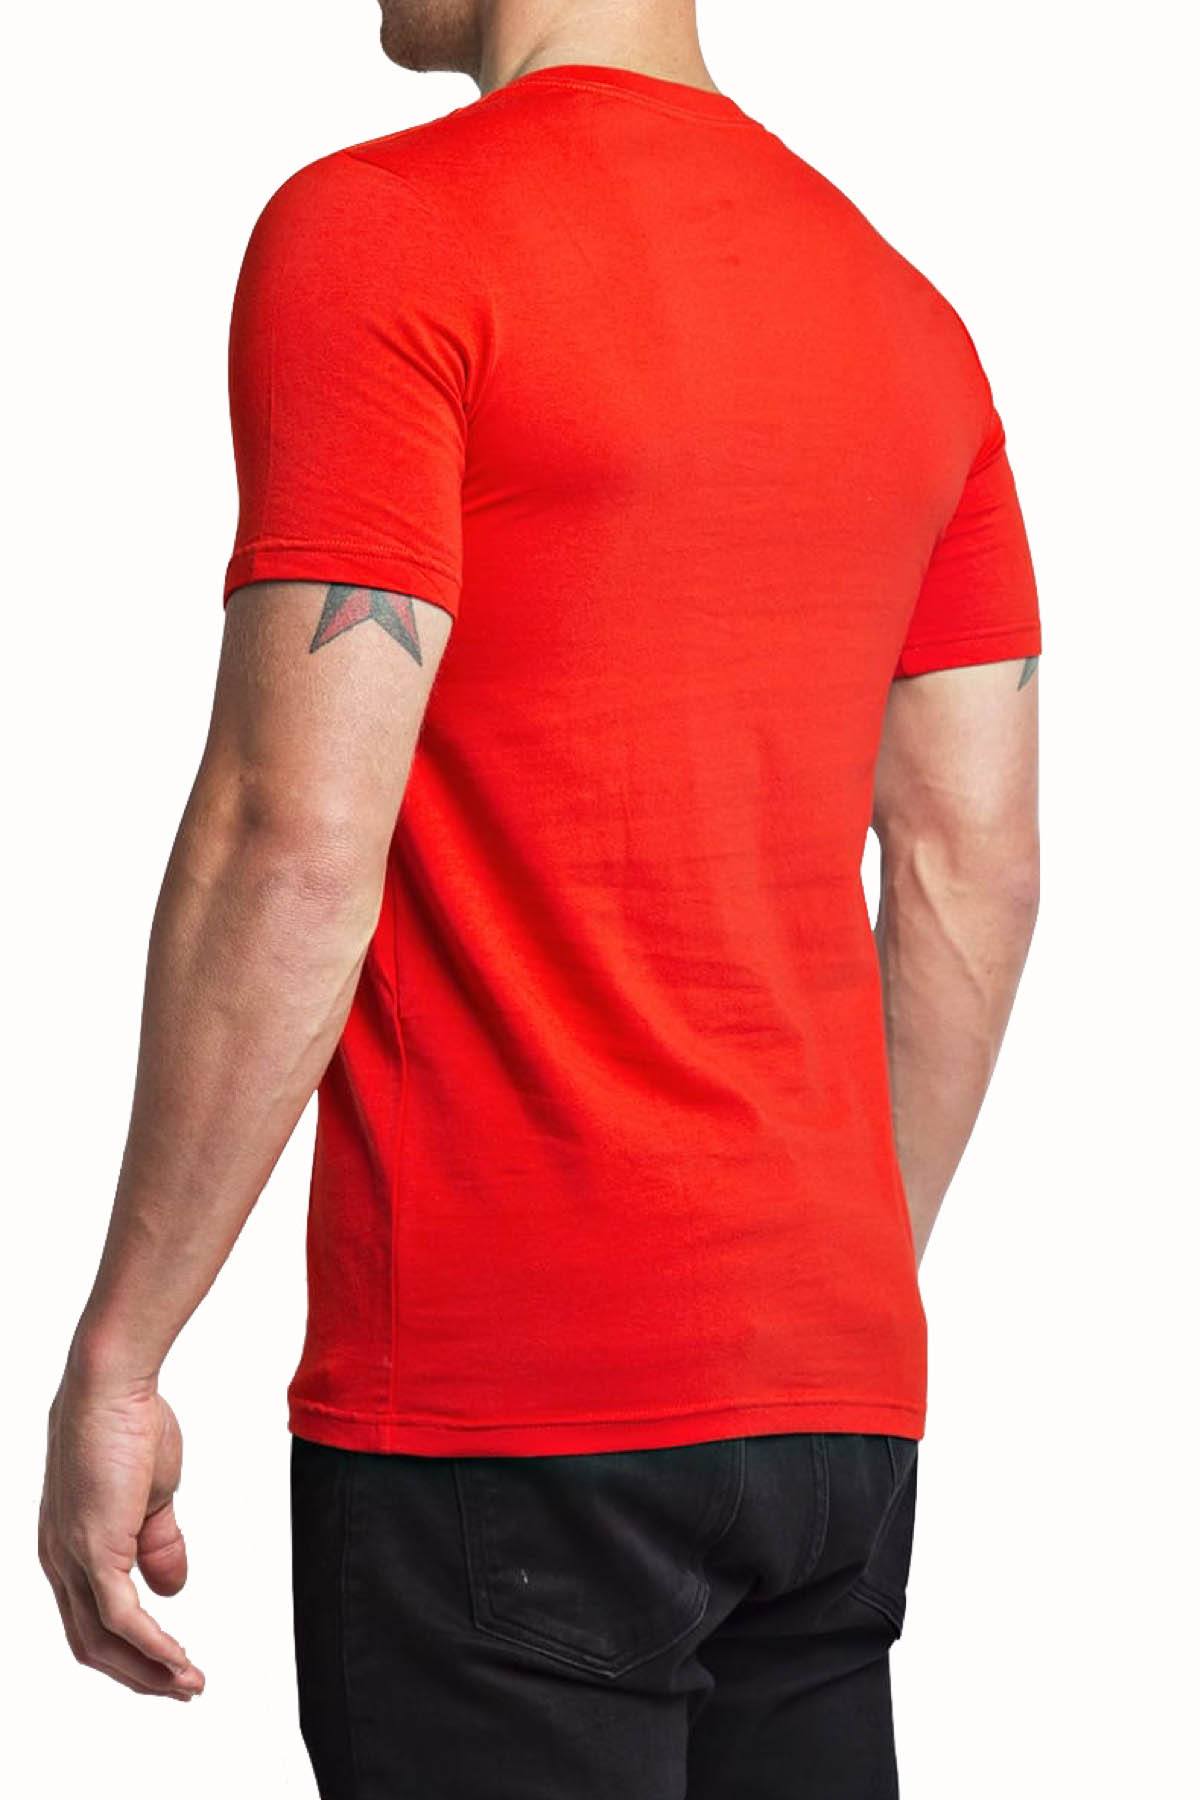 Trend Red Stretch V-Neck Tee